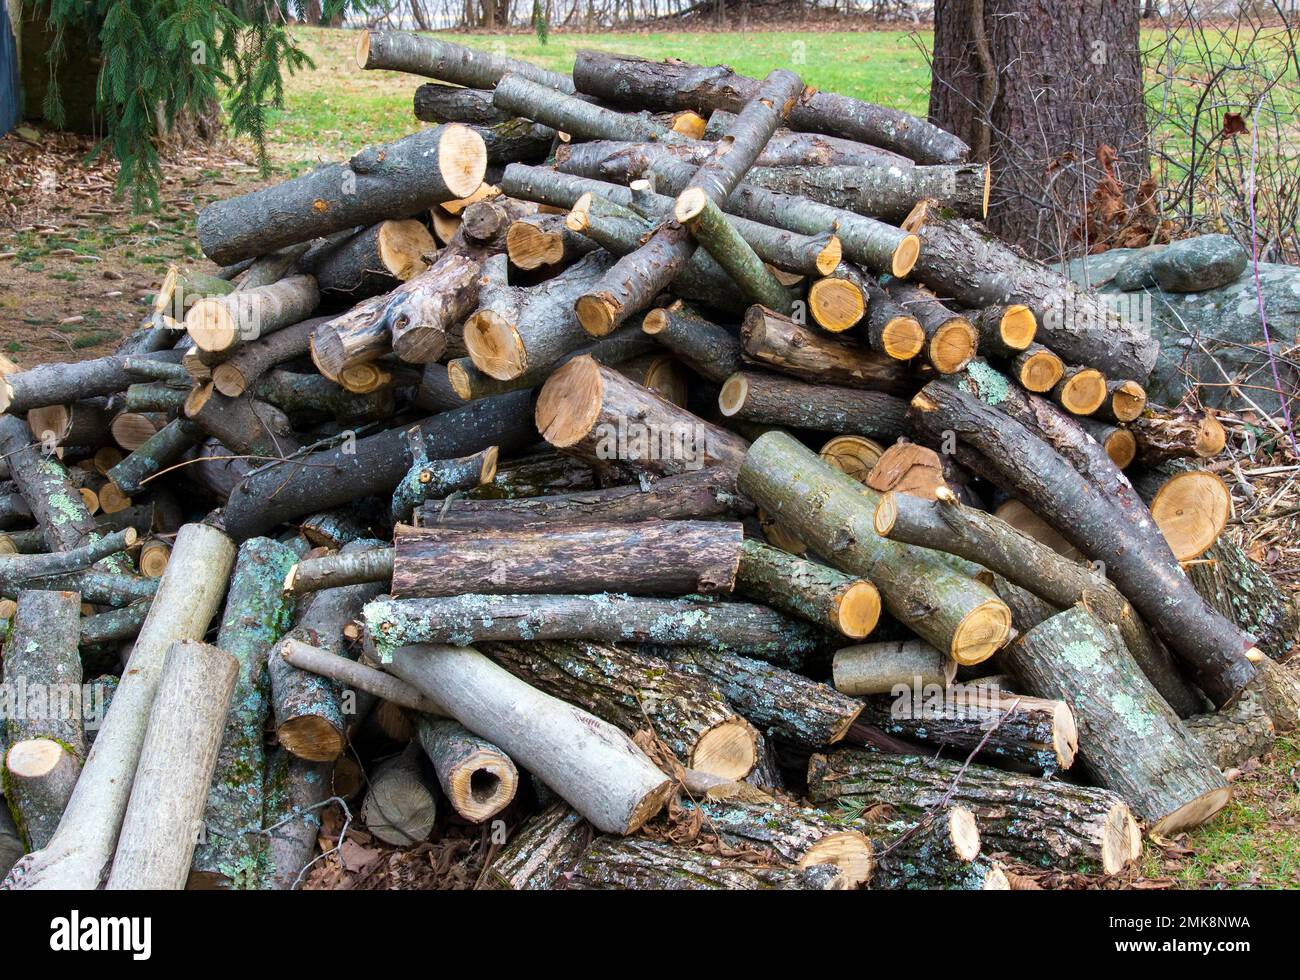 A stack of various length hardwood logs for firewood Stock Photo